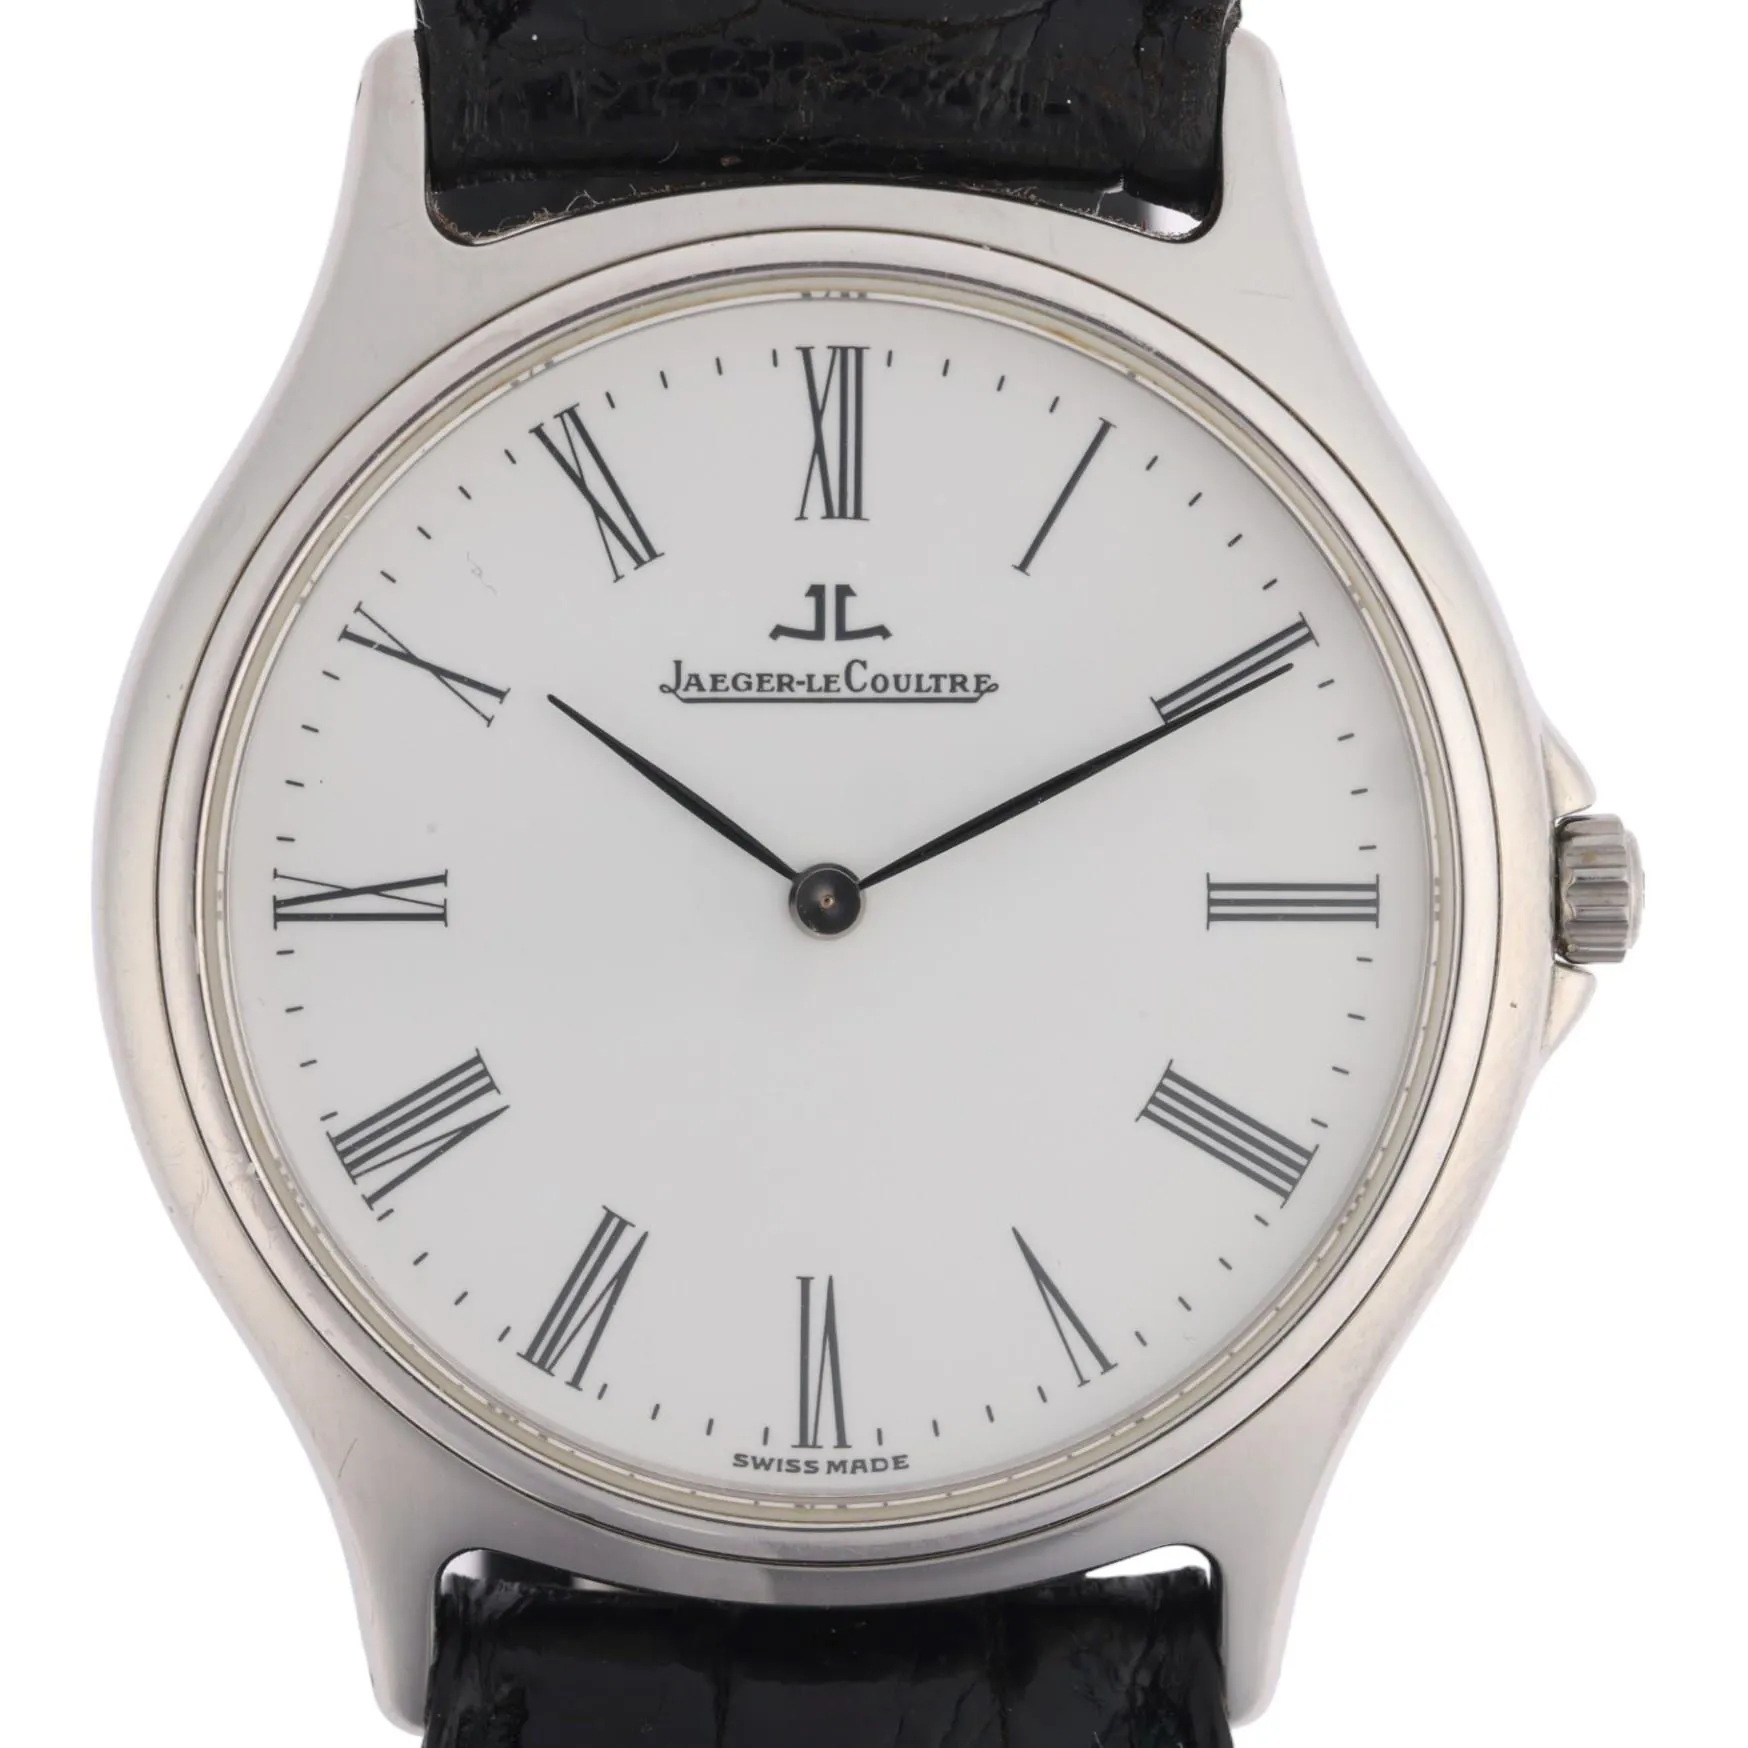 Jaeger-LeCoultre Heraion 112.8.08 34mm Stainless steel White